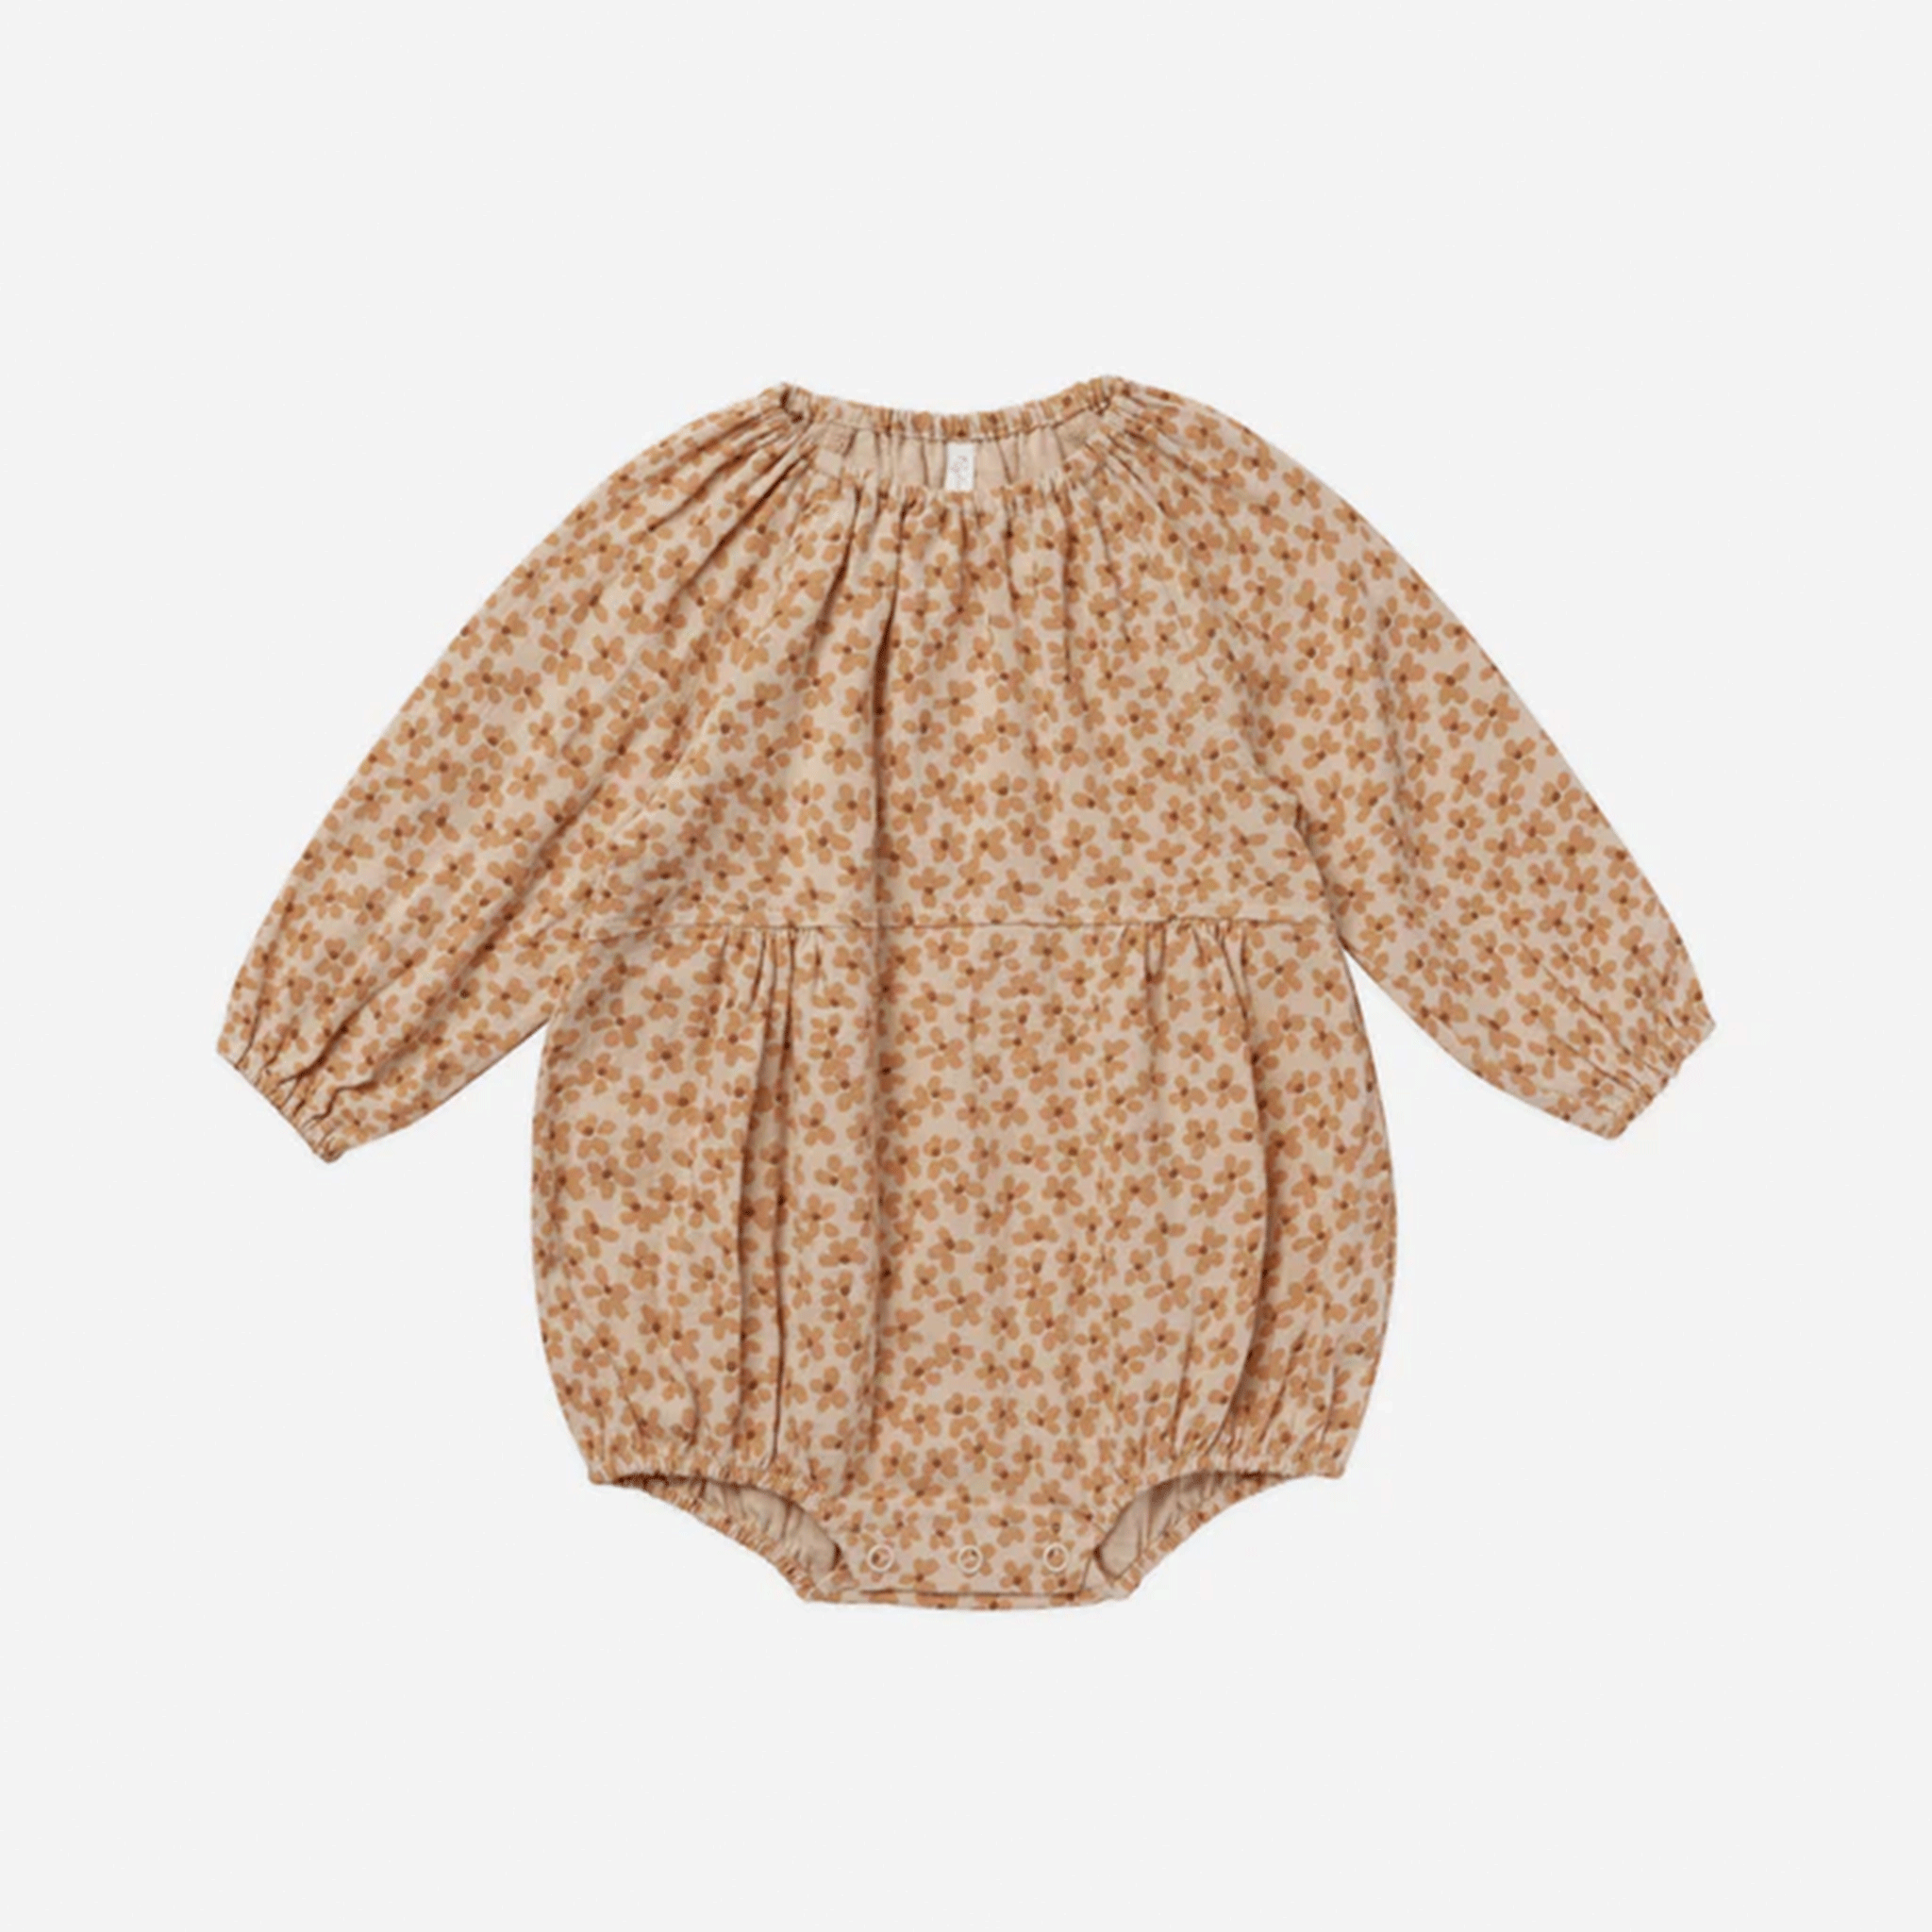 On a white background is a tan long sleeve baby romper with a similar colored floral print on it.